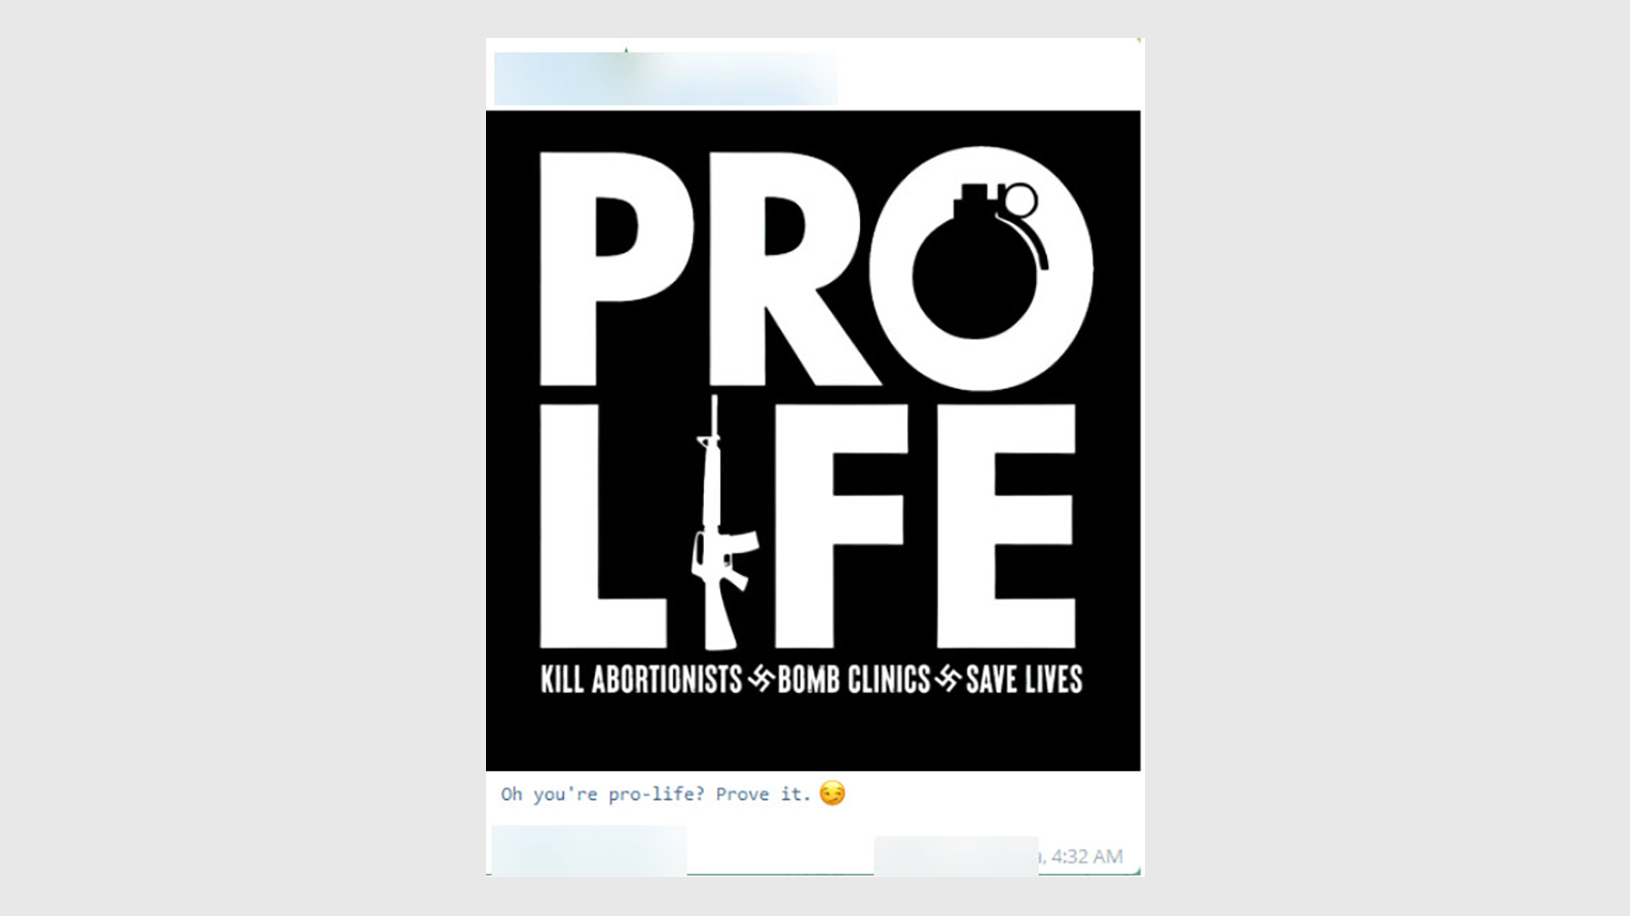 Refuting Pro-Choice Memes - Equal Rights Institute Blog